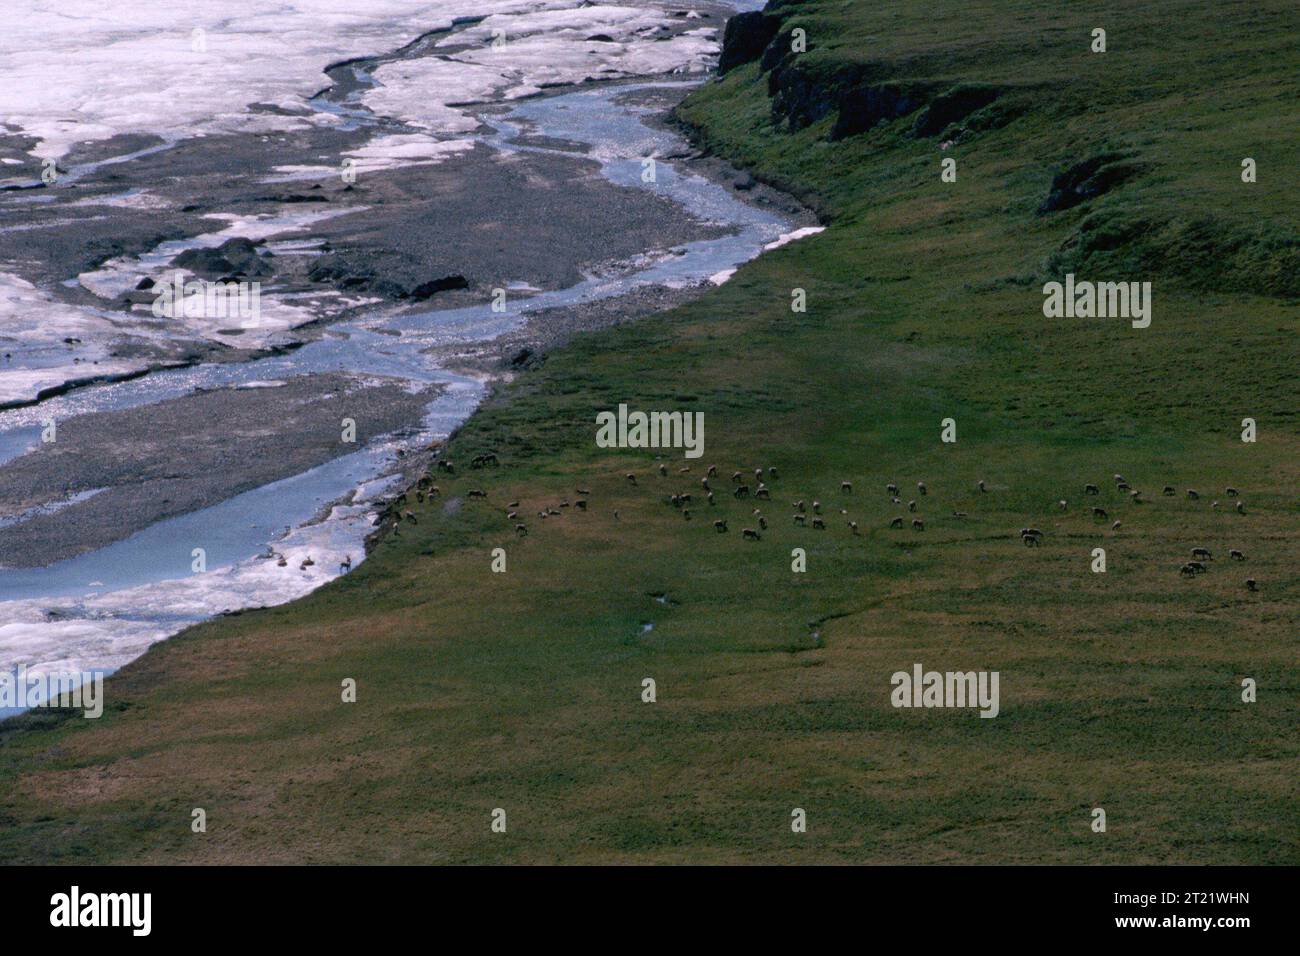 Aerial view of herd of caribou on the Arctic coastal plains. For more information about this refuge and the caribou visit http://alaska.fws.gov/nwr/arctic/caribou.htm. Subjects: Aerial photography; Coastal environments; Environments (Natural); Indigenous populations; Mammals; Wildlife; Scenics; Tundra; Wilderness. Location: Alaska. Fish and Wildlife Service Site: Arctic National Wildlife Refuge.   Collection: Wildlife and Endangered Species. Stock Photo